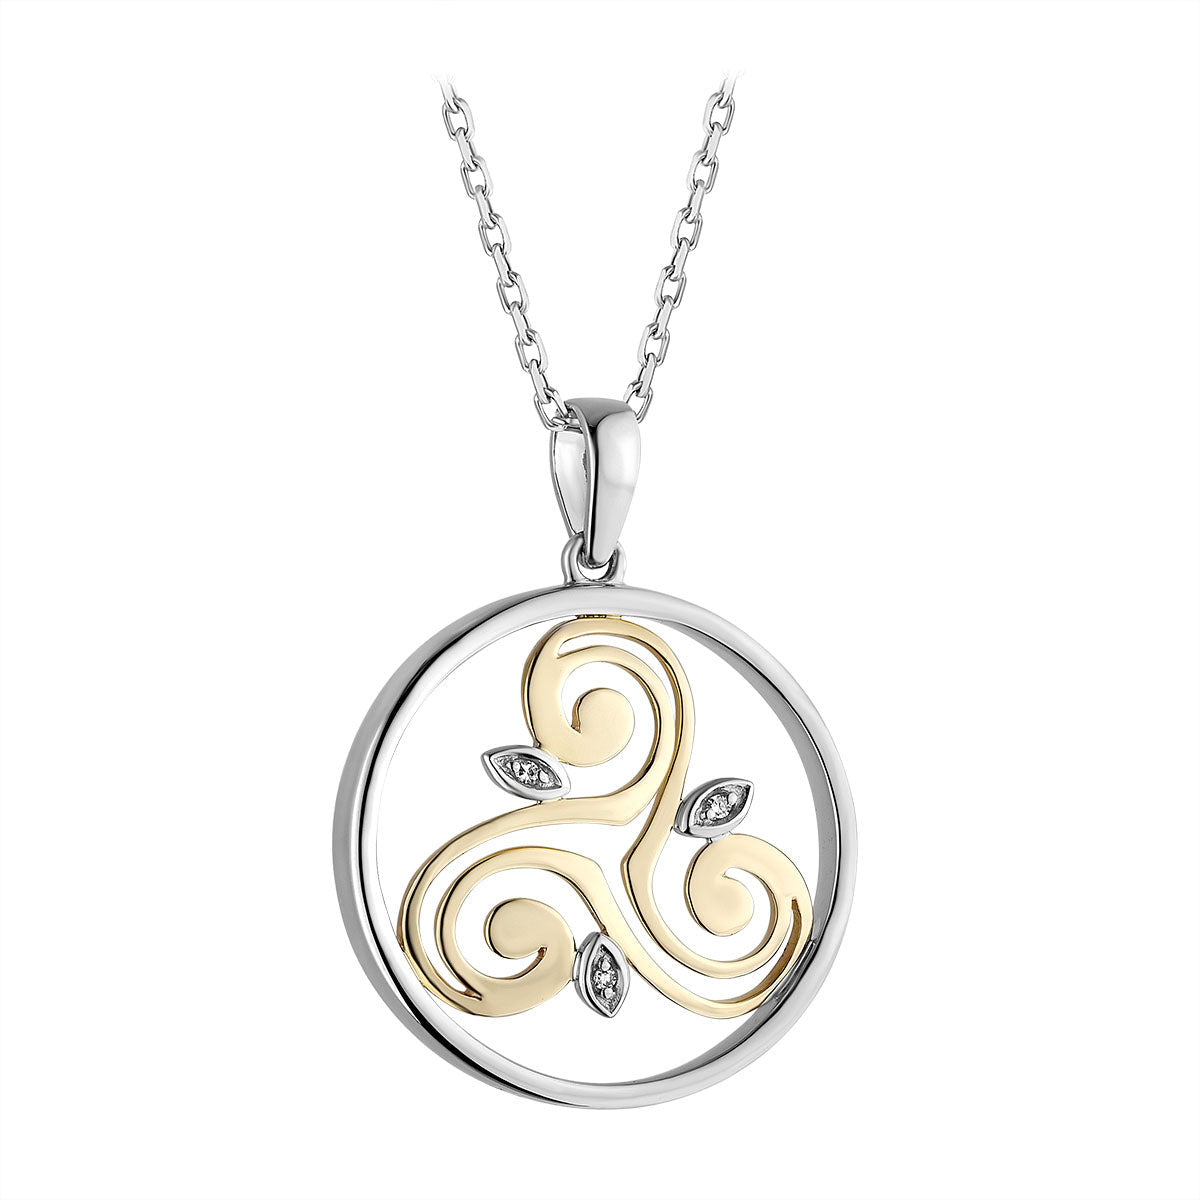 Two tone gold Celtic design Necklace S46803 on 18 inch sterling silver Rolo chain from Solvar